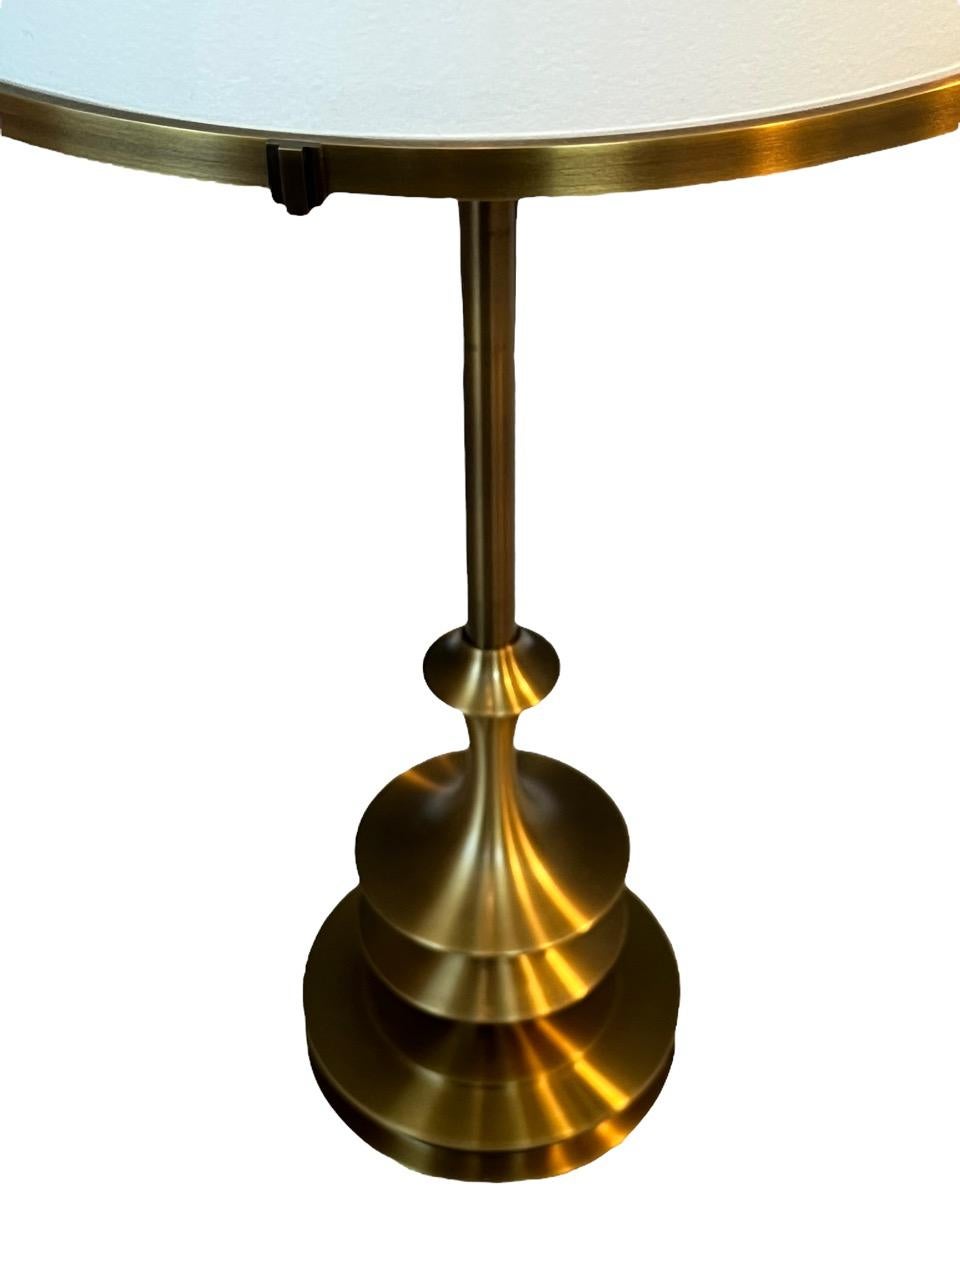 Contemporary Pair of Side Table Lamps, Solid Brass by Designer Solis Betancourt 8